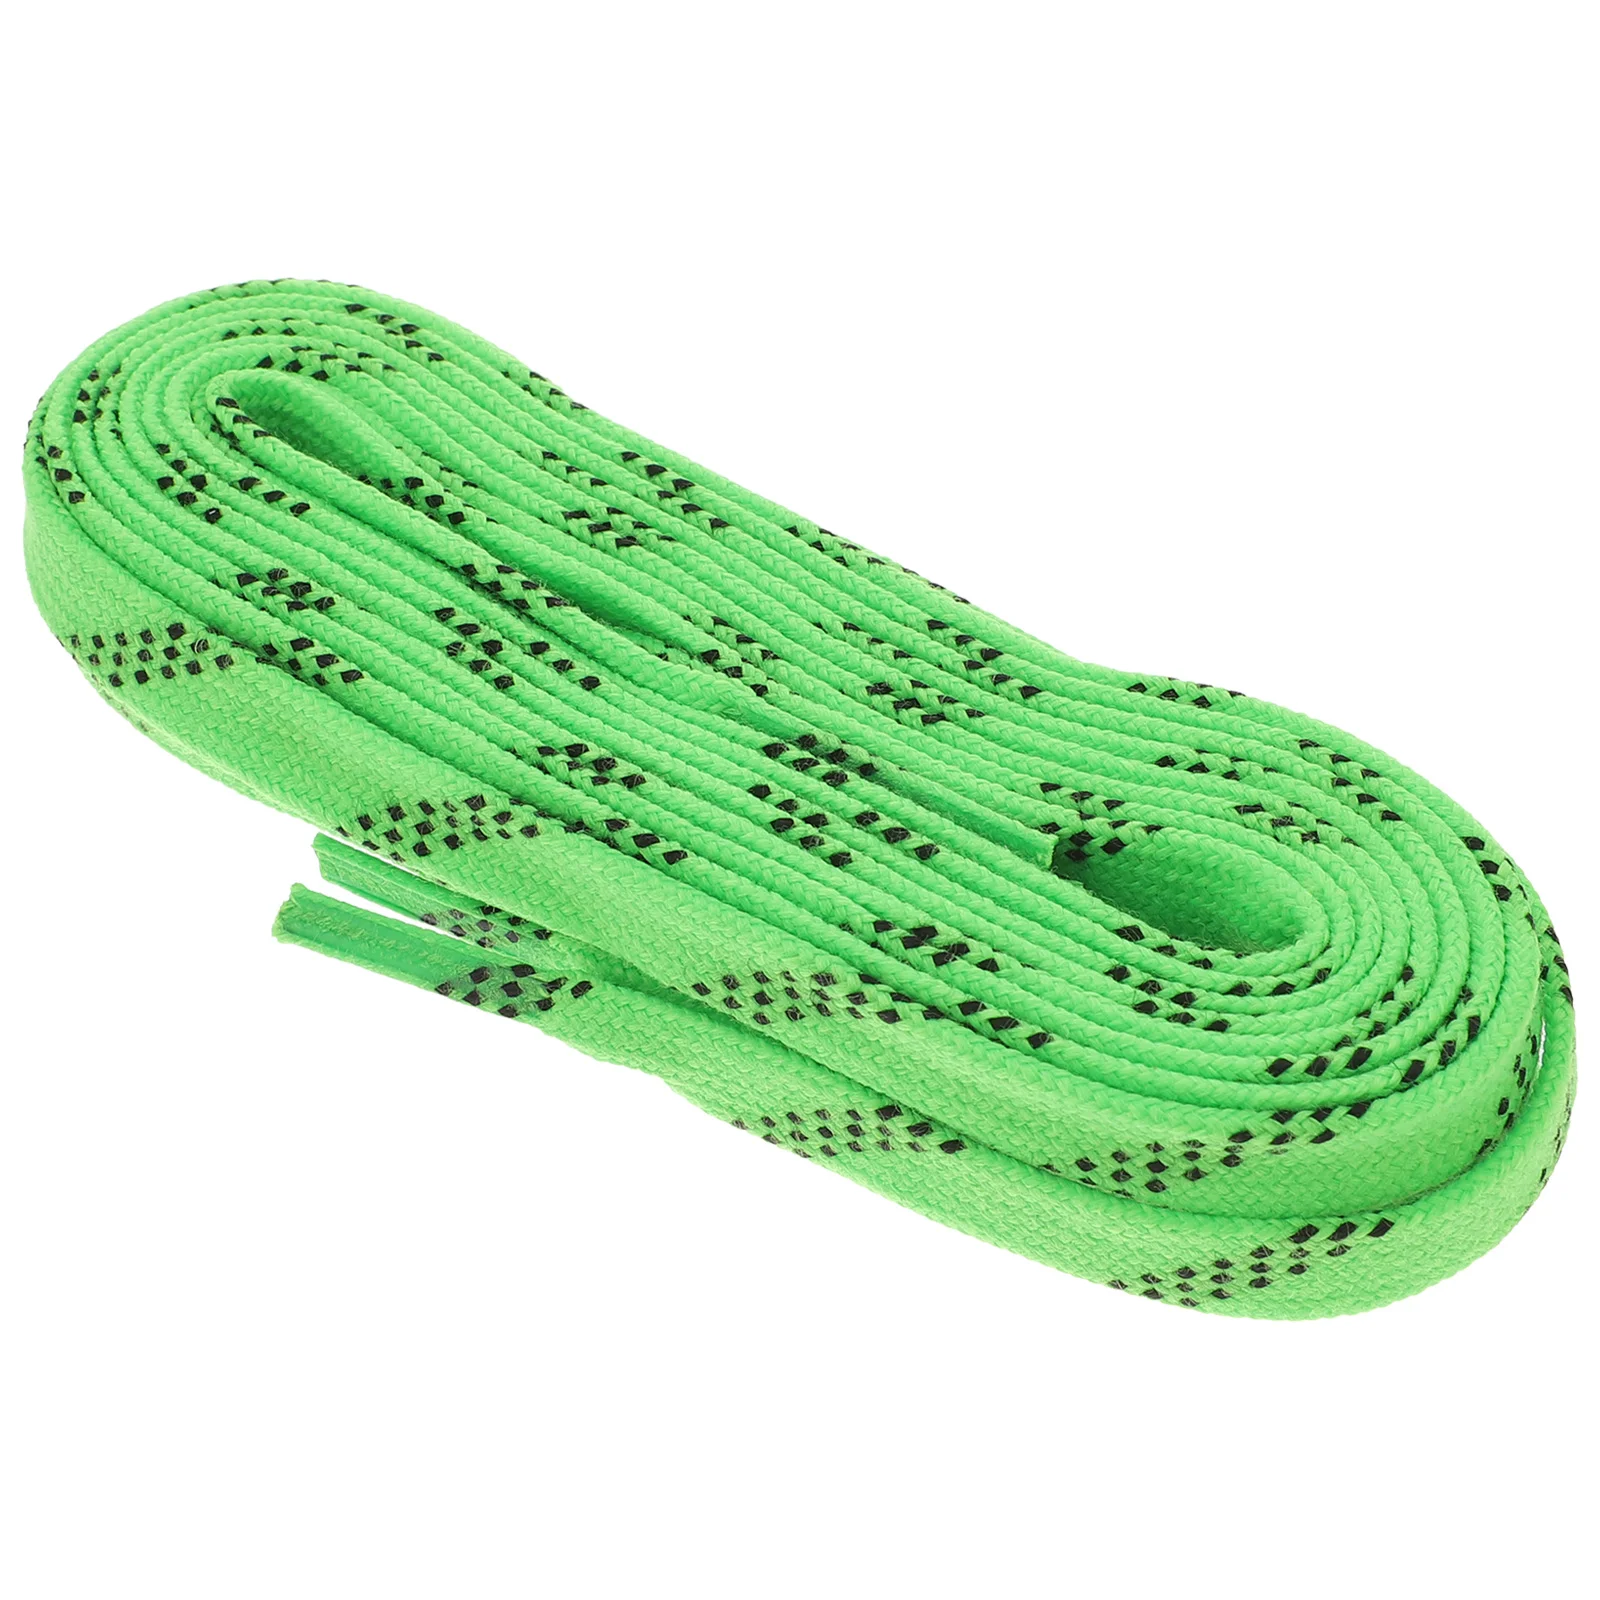 

Skate Laces Ice Hockey Shoelaces Roller Lace Waxed Shoe Tightener Skates Flat Derby Strings Up Wide Puller Bite Protector